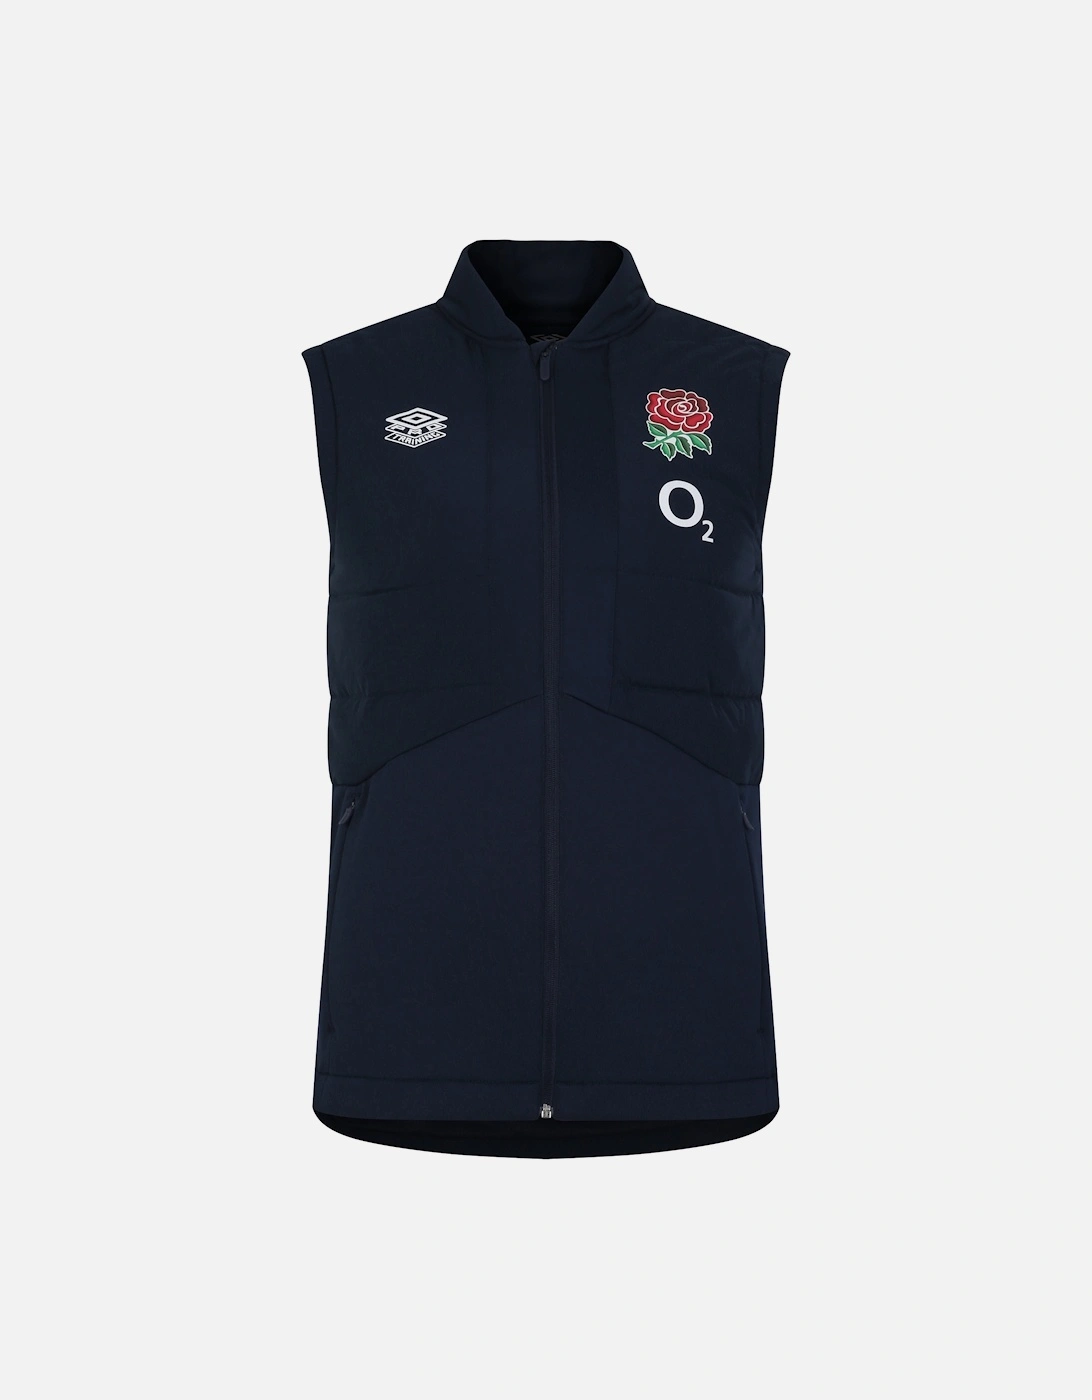 Mens 23/24 England Rugby Gilet, 6 of 5